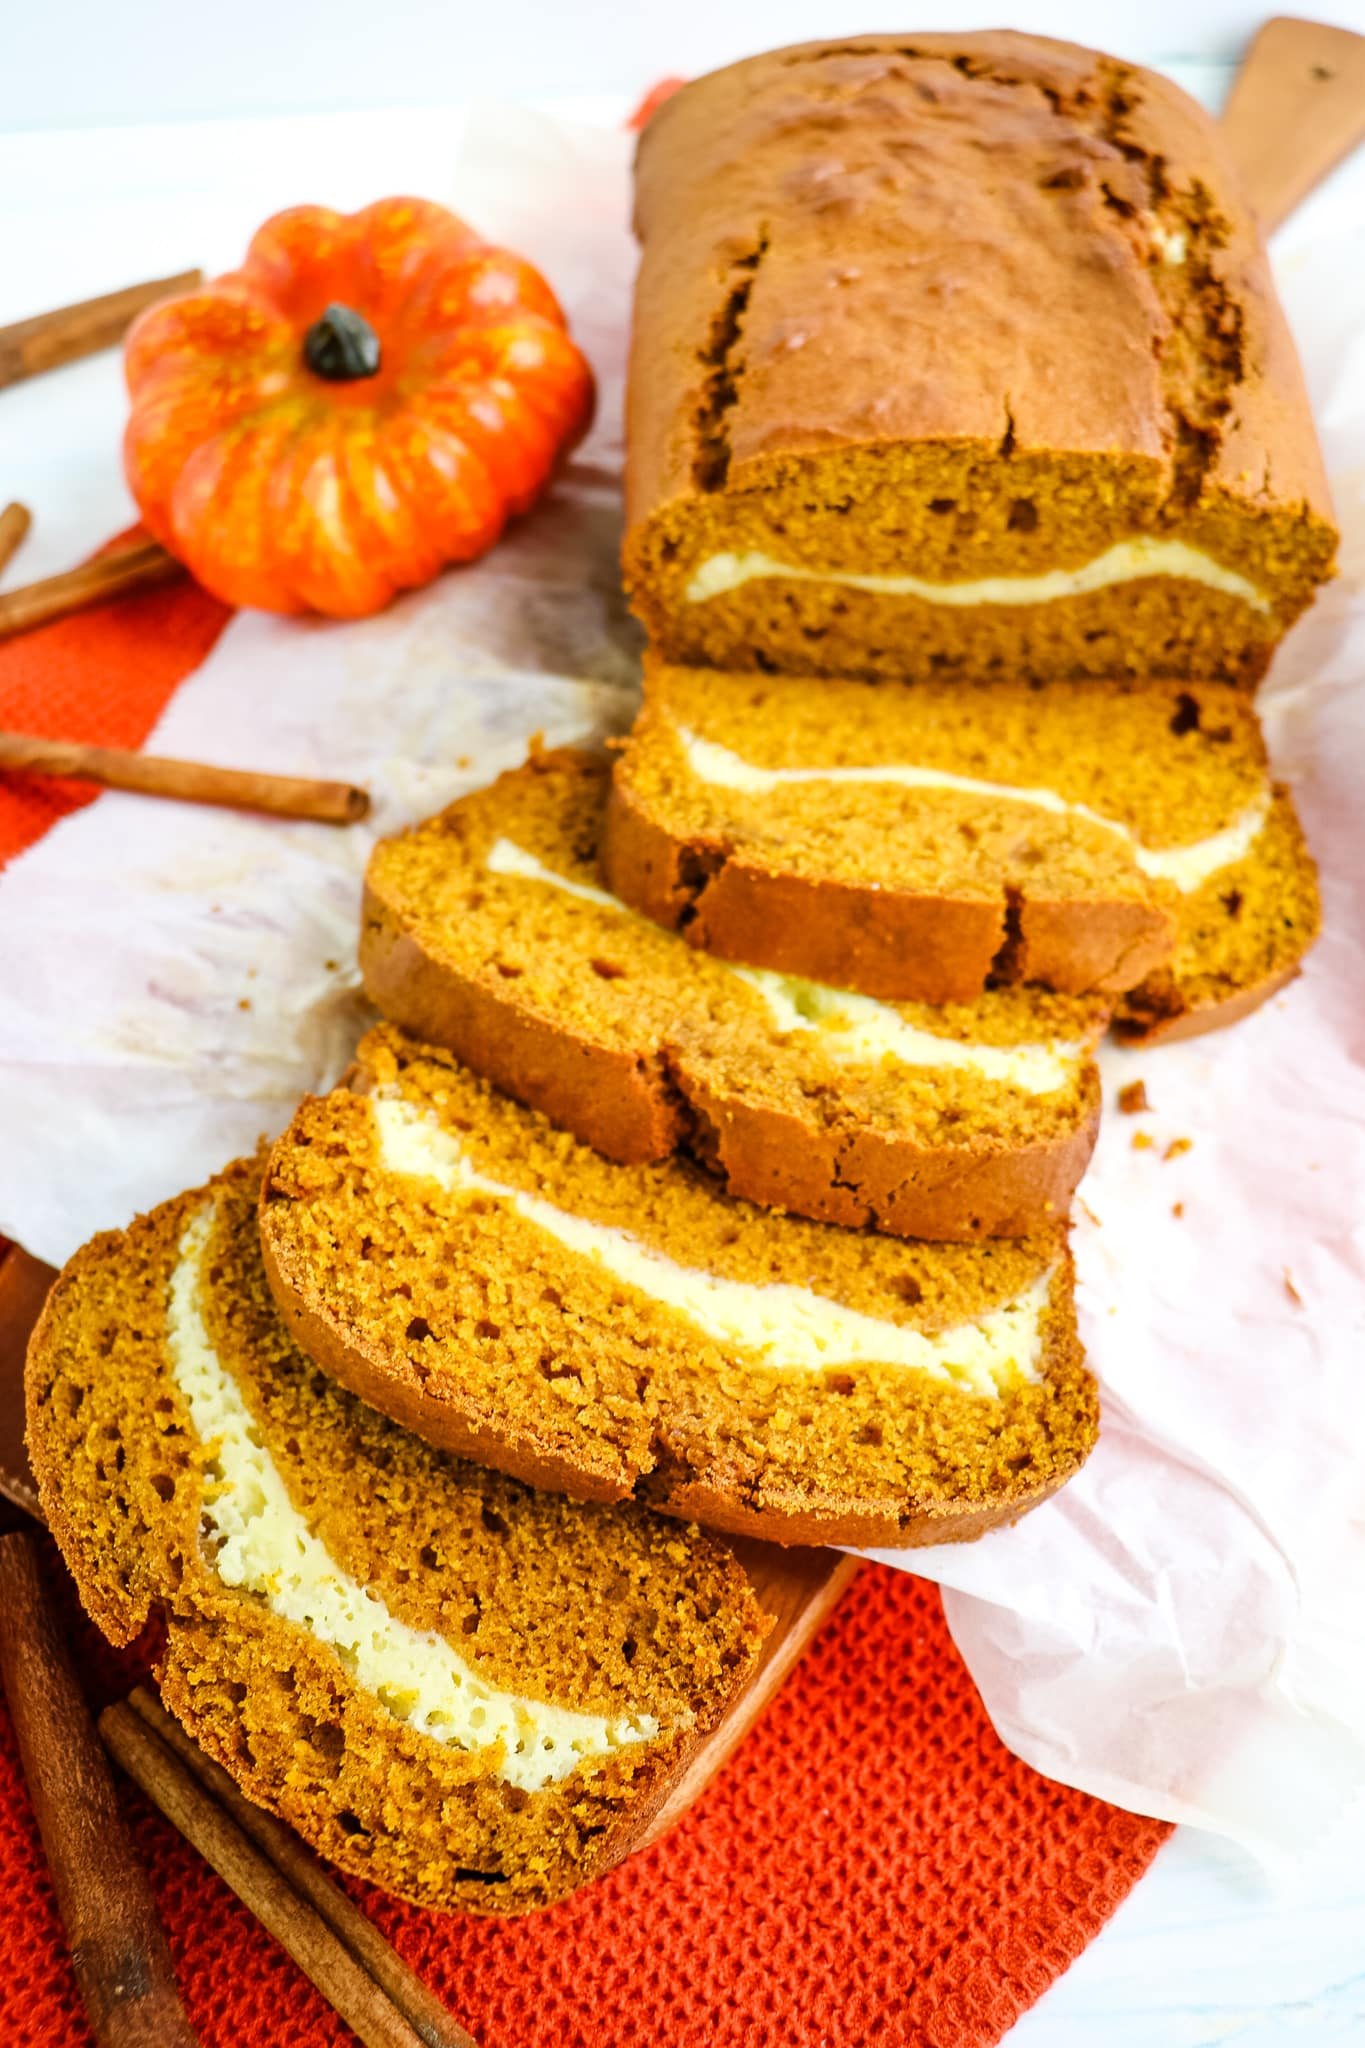 Cream cheese pumpkin bread with slices on their side.